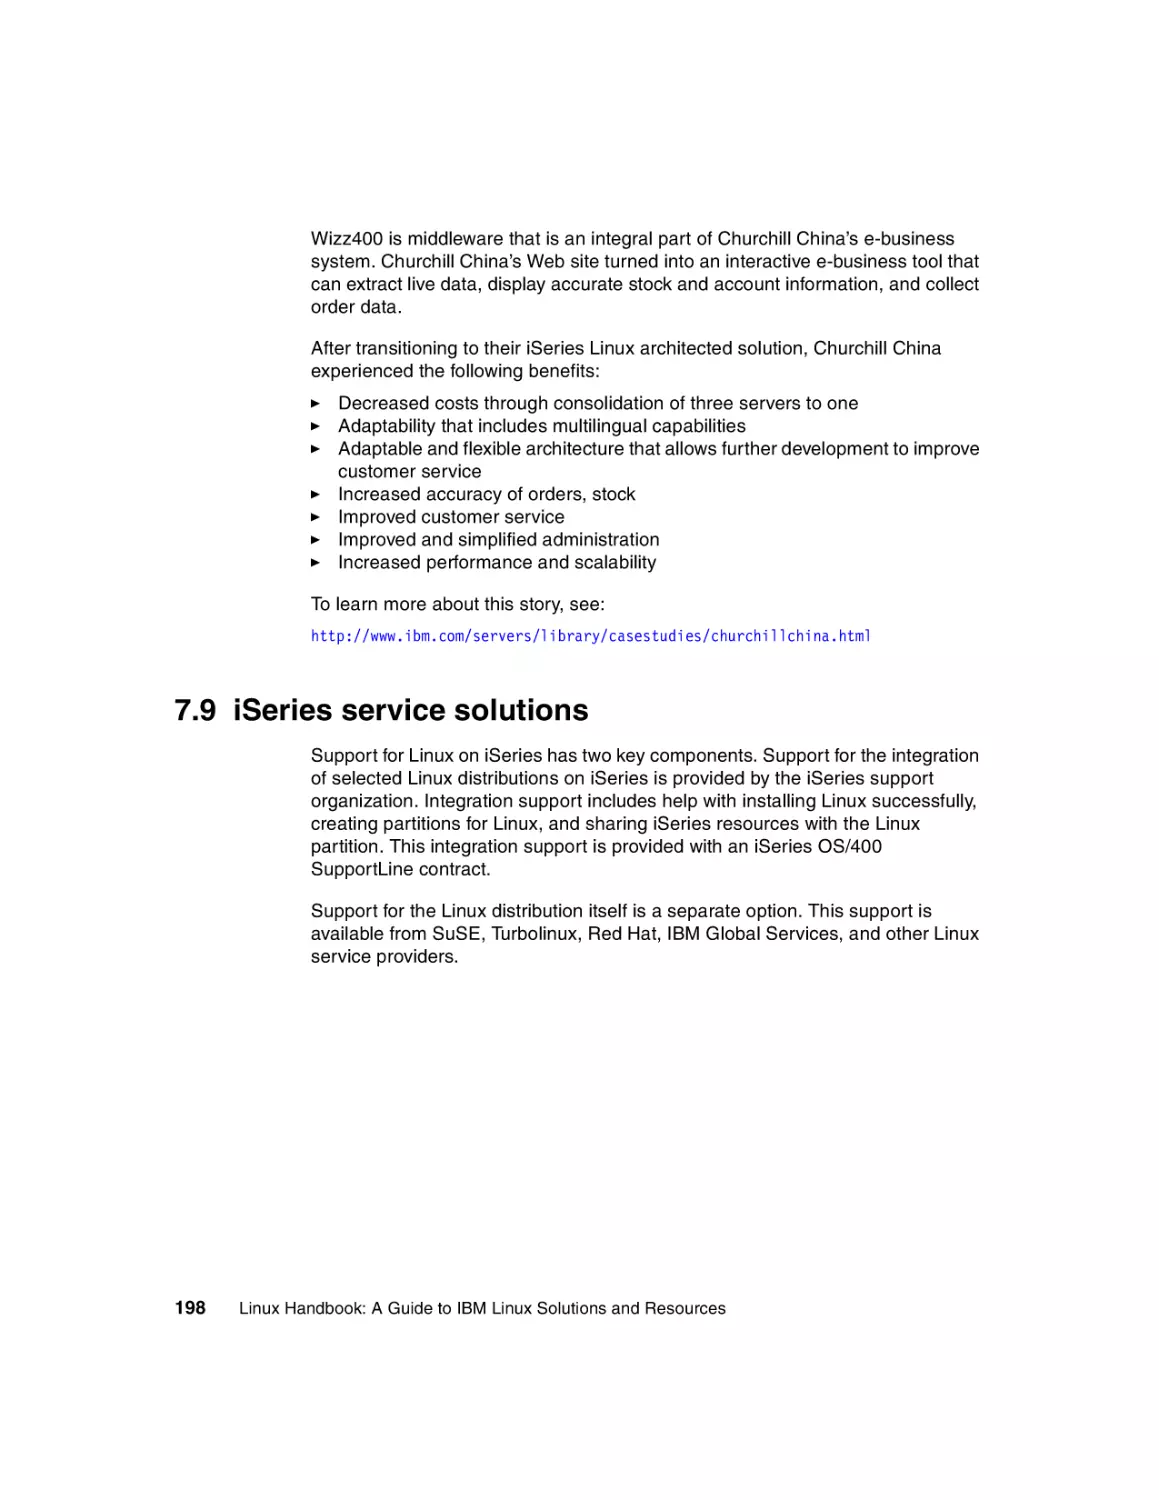 7.9 iSeries service solutions